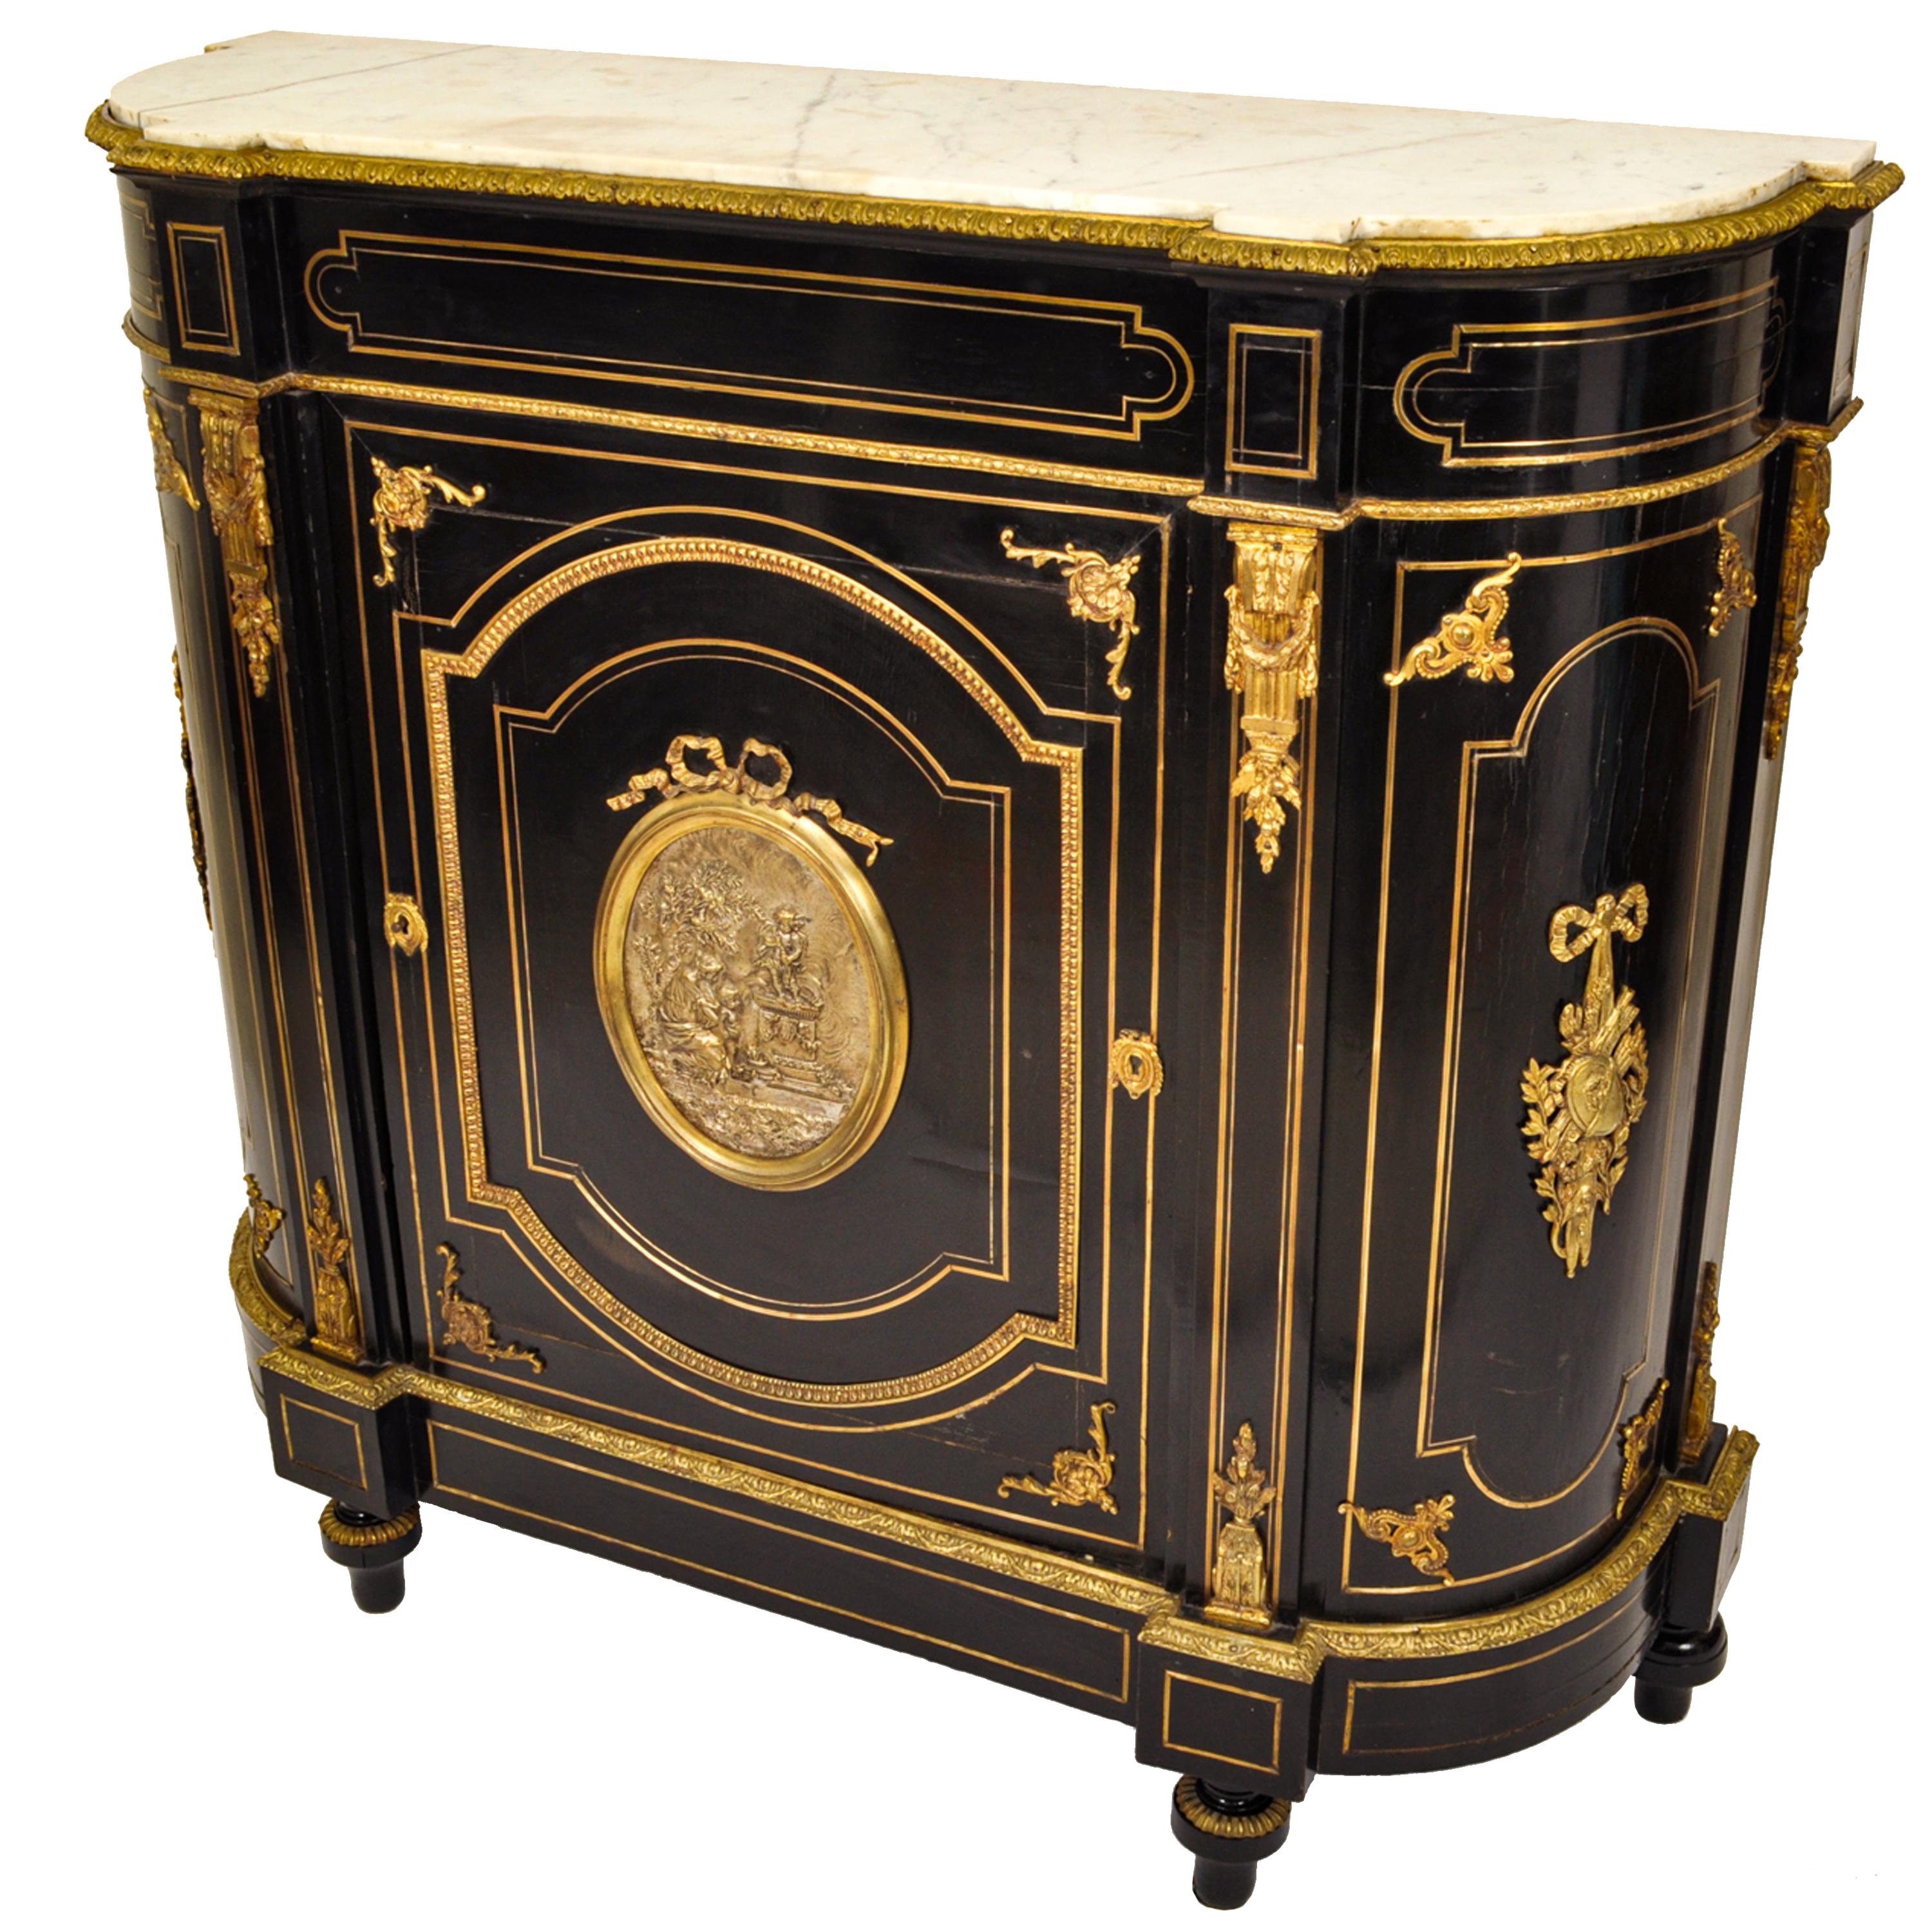 Antique French Napoleon III Gilt Bronze Medallion & Marble Ebonized Cabinet 1860 In Good Condition For Sale In Portland, OR